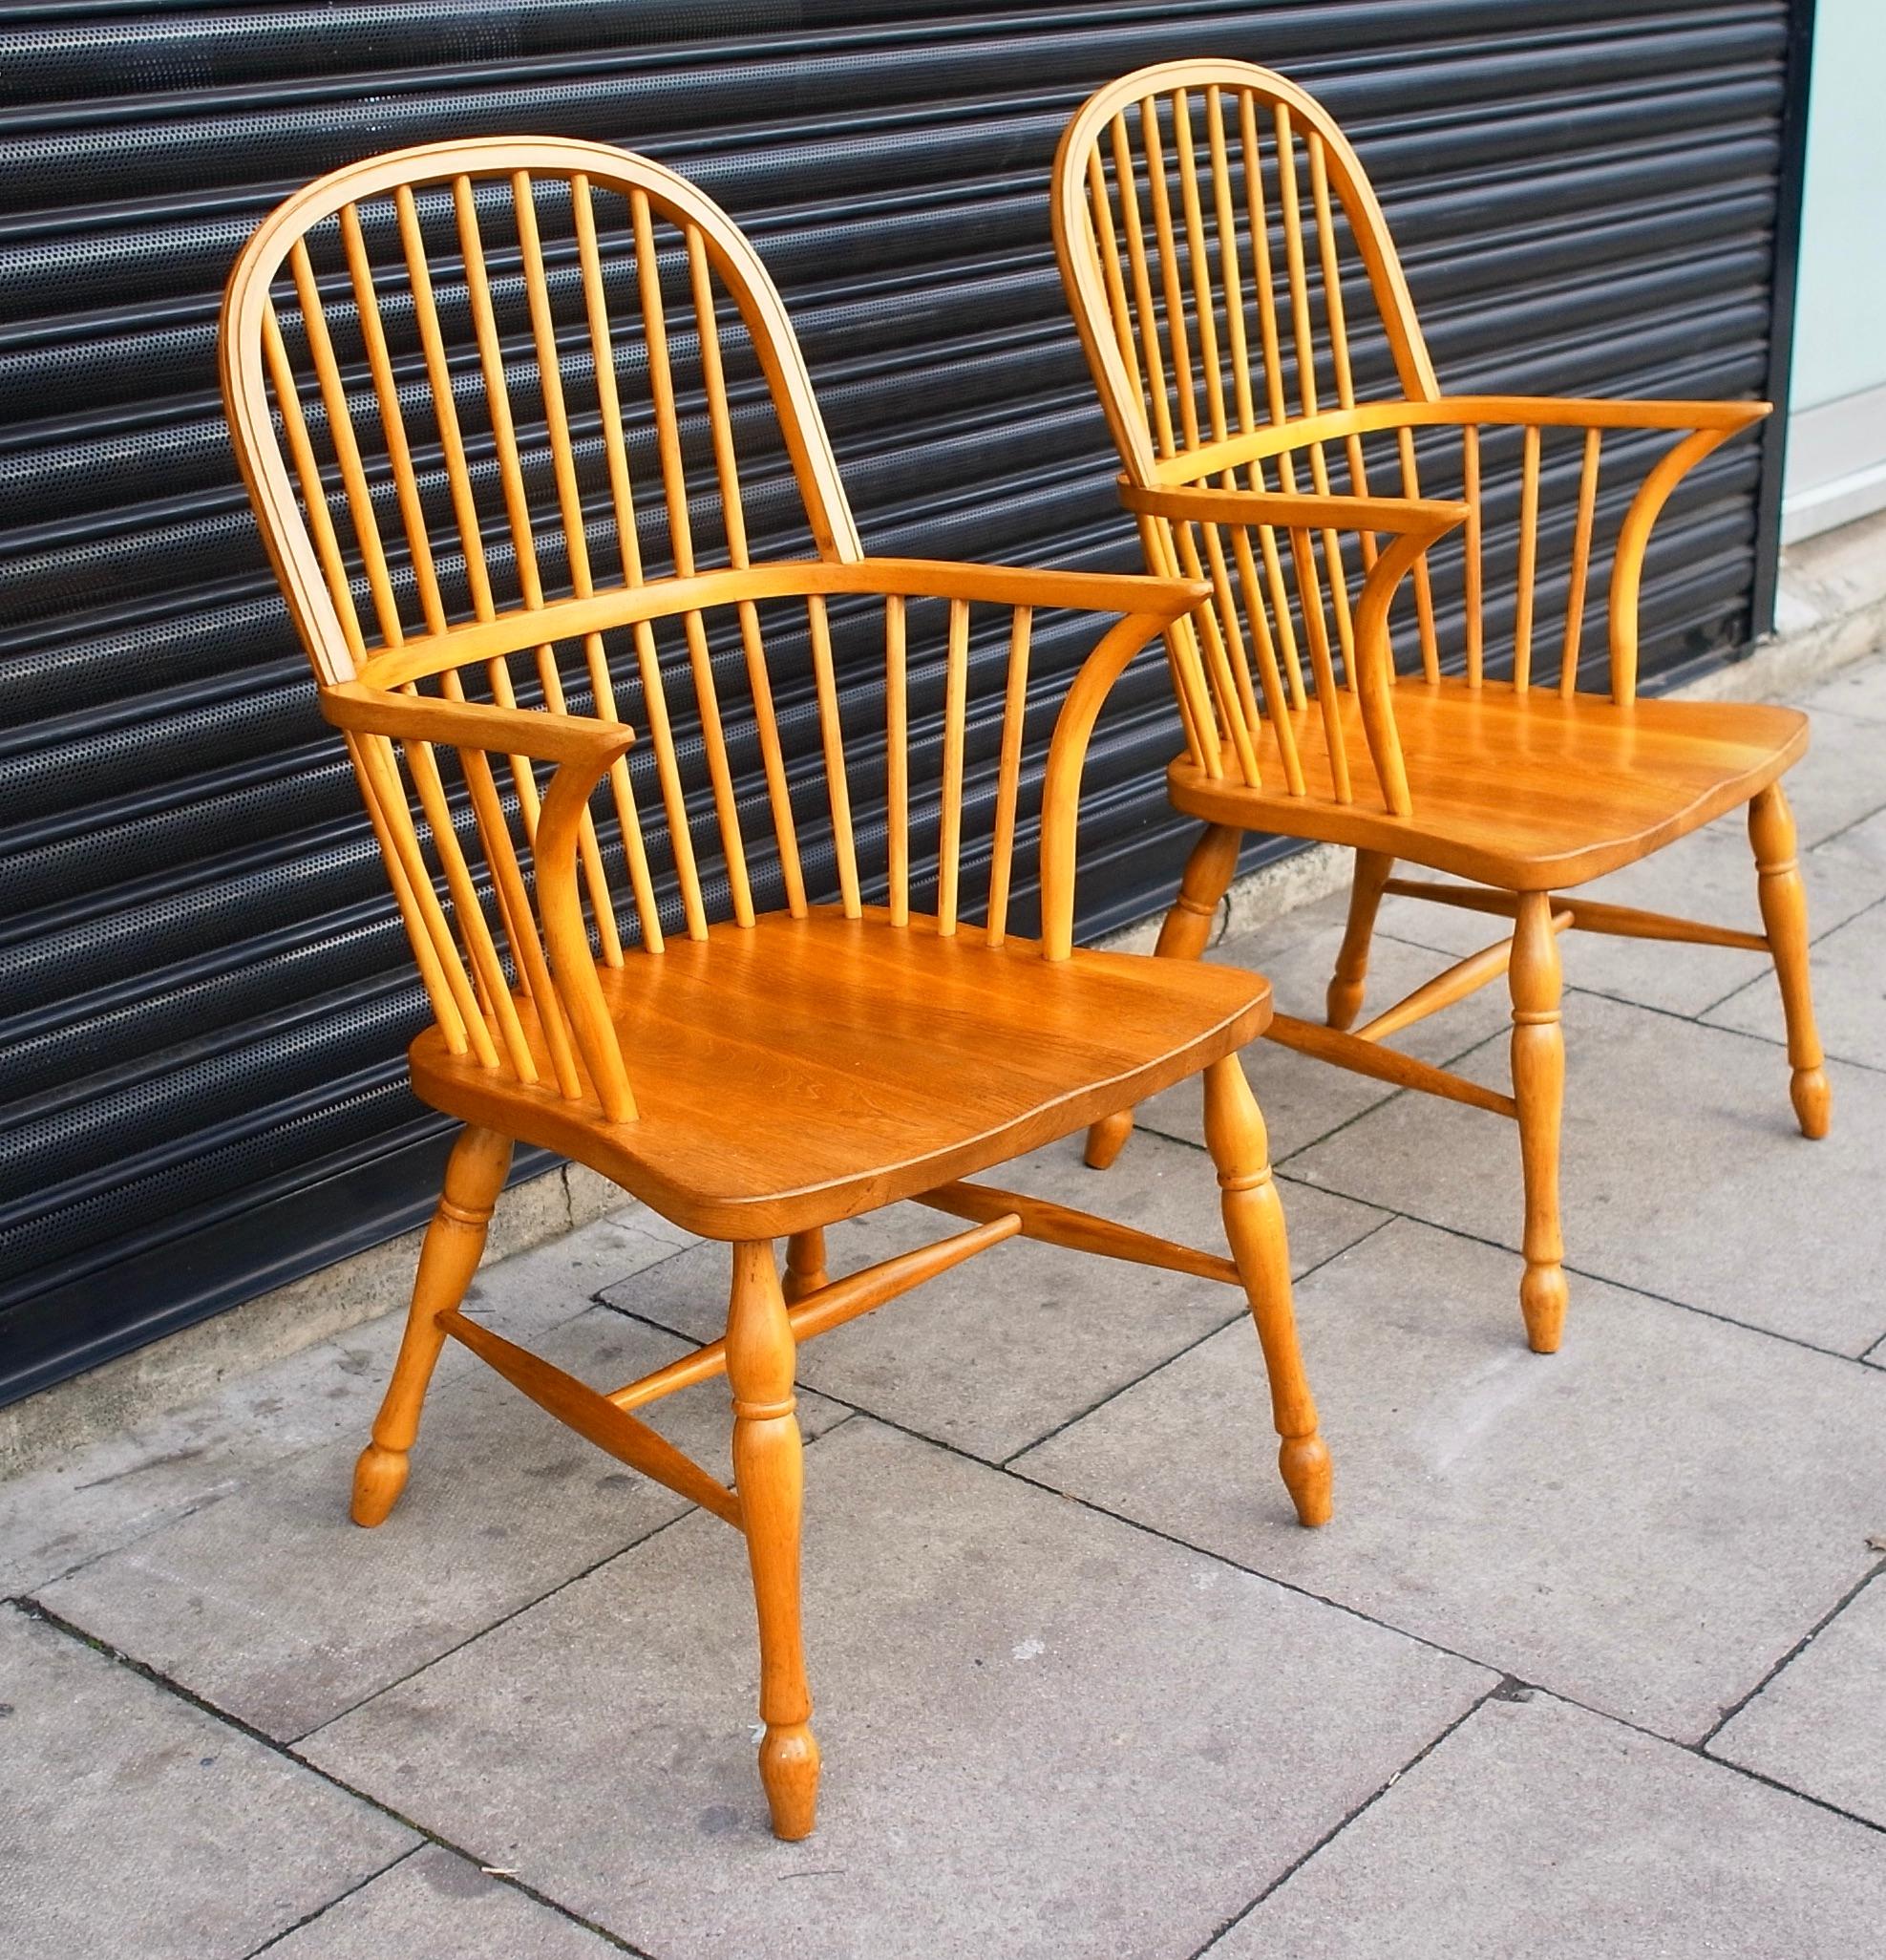 A stylish pair of pine framed late 20th century windsor chairs on classic turned legs. These chairs are in very good vintage condition having been cleaned and polished, with all joints inspected and found to be sturdy.